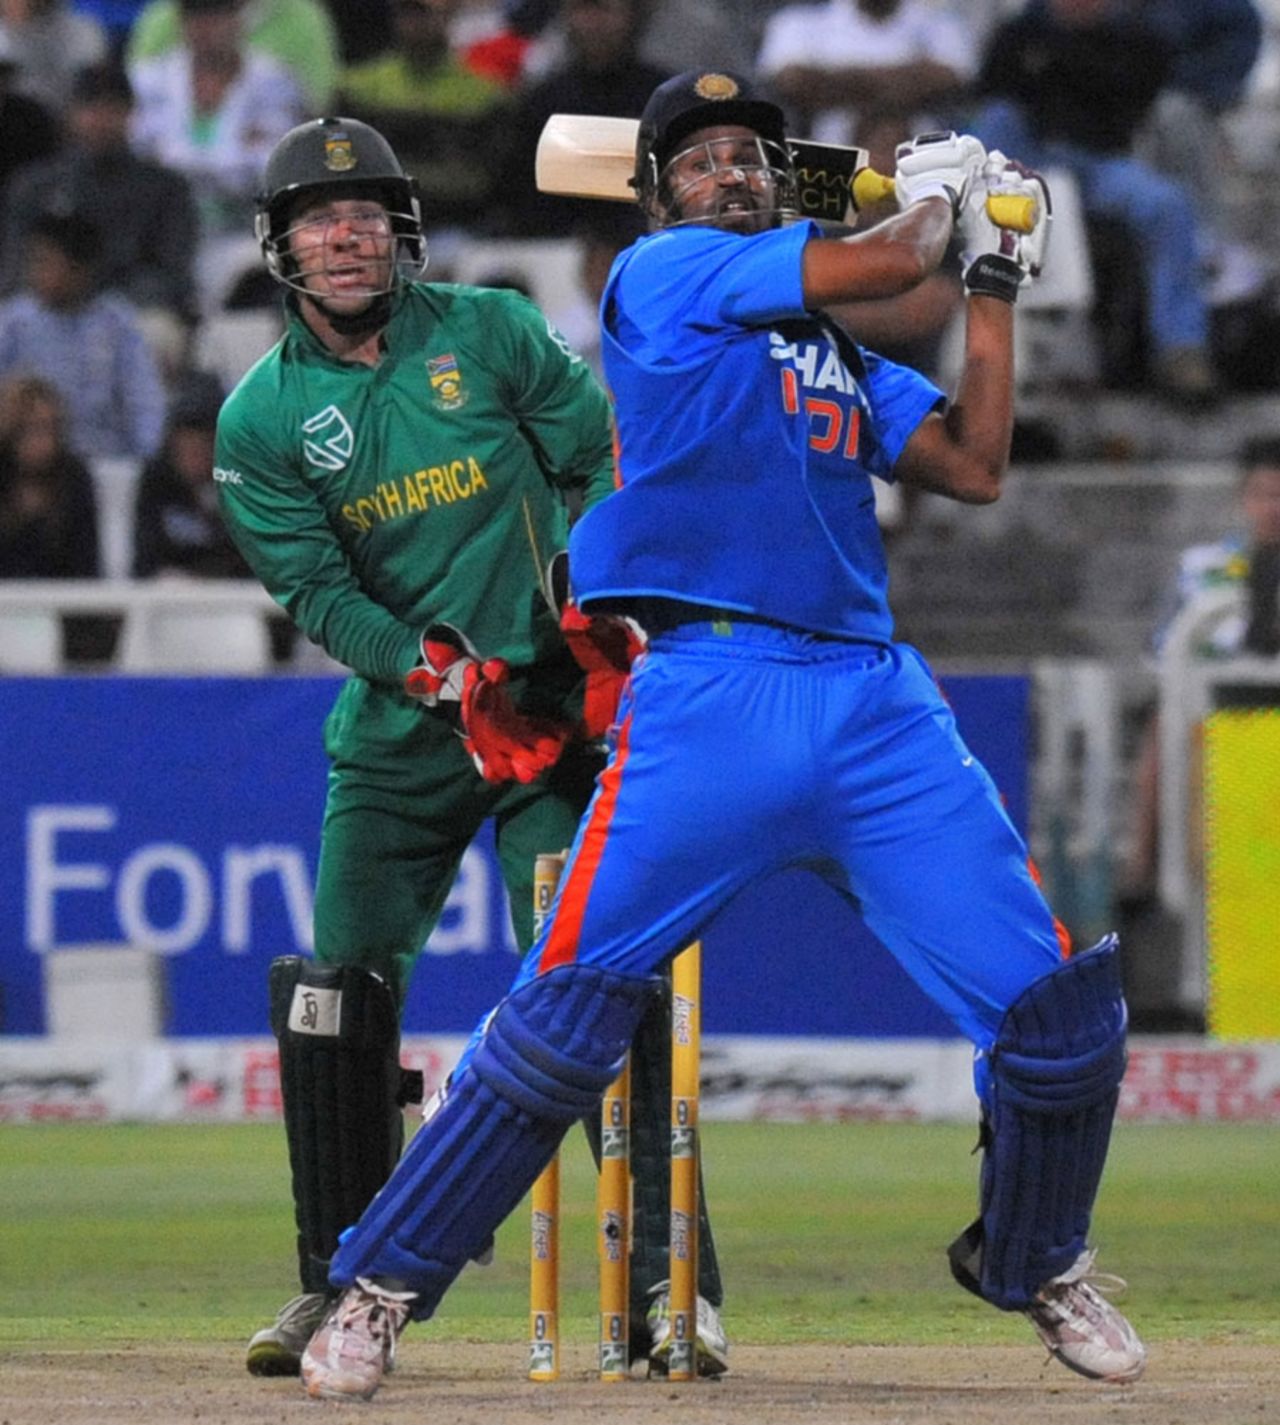 Yusuf Pathan smashes a four during his 59 off 50 balls, South Africa v India, 3rd ODI, Cape Town, January 18, 2011